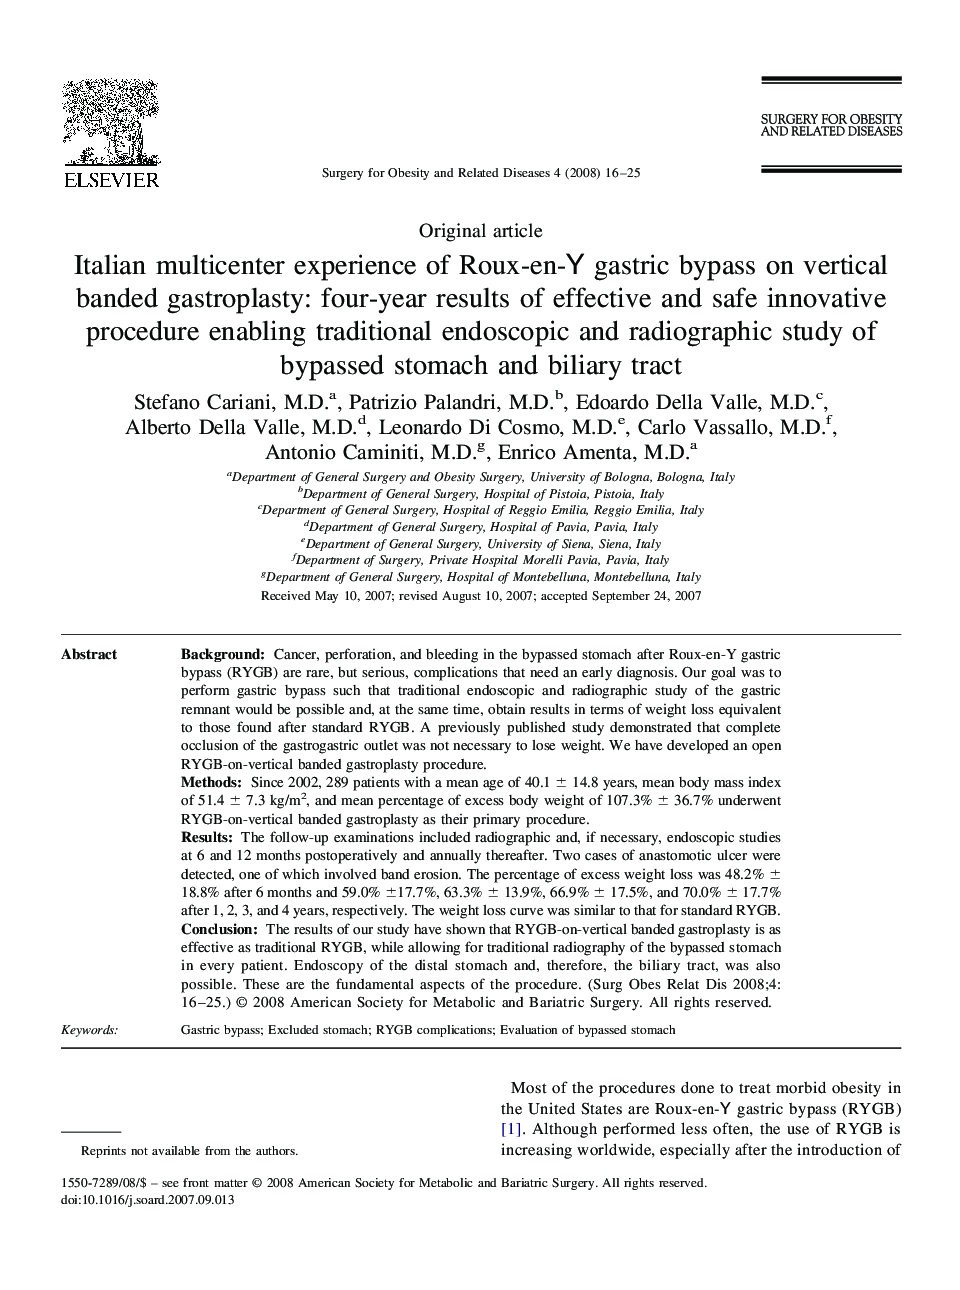 Italian multicenter experience of Roux-en-Y gastric bypass on vertical banded gastroplasty: four-year results of effective and safe innovative procedure enabling traditional endoscopic and radiographic study of bypassed stomach and biliary tract